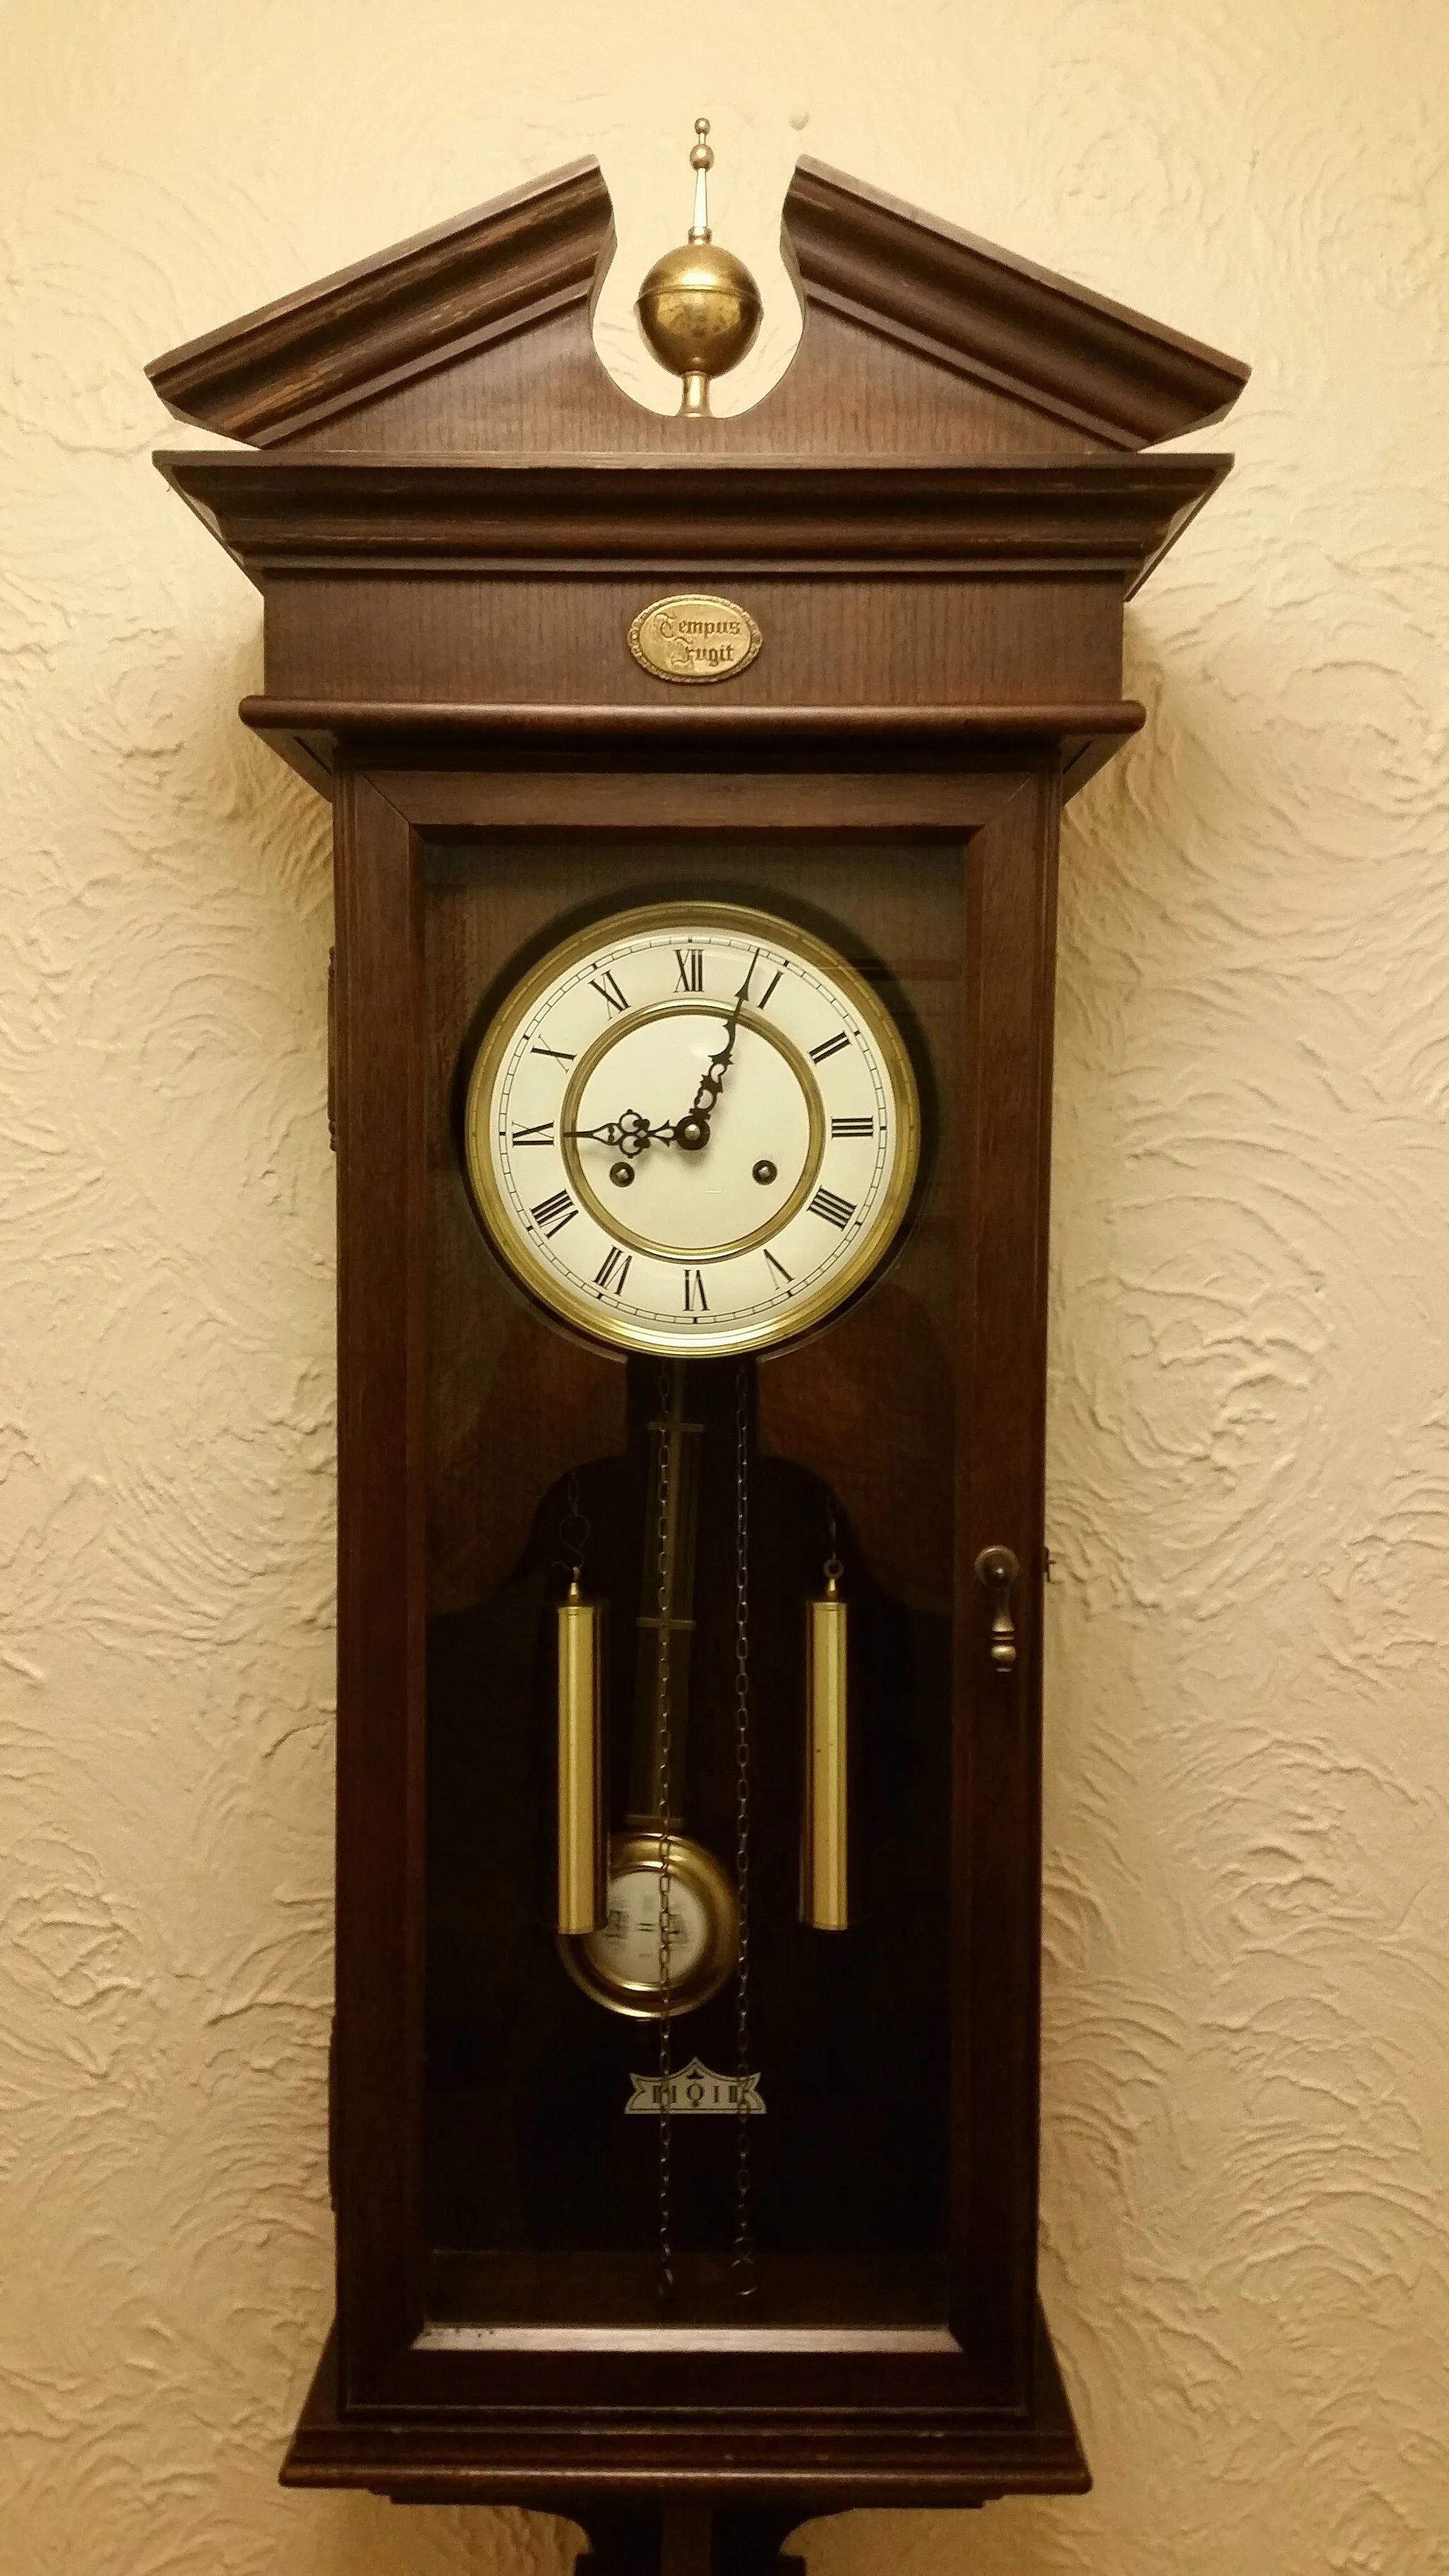 Photo showing: a clock